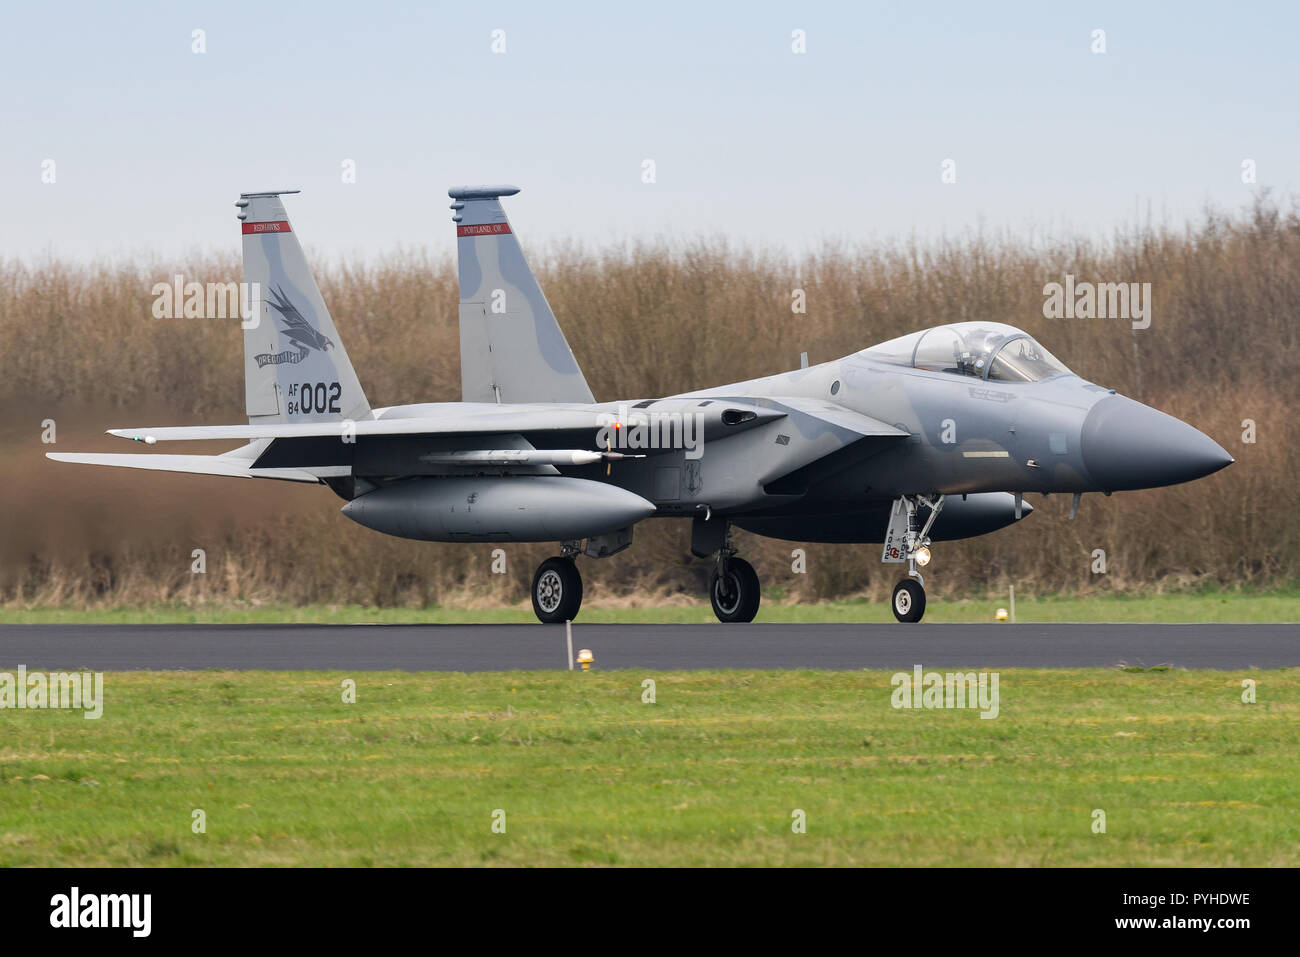 A McDonnell Douglas F-15E Strike Eagle fighter jet of the United States Air Force at the Leeuwarden airbase in The Netherlands. Stock Photo